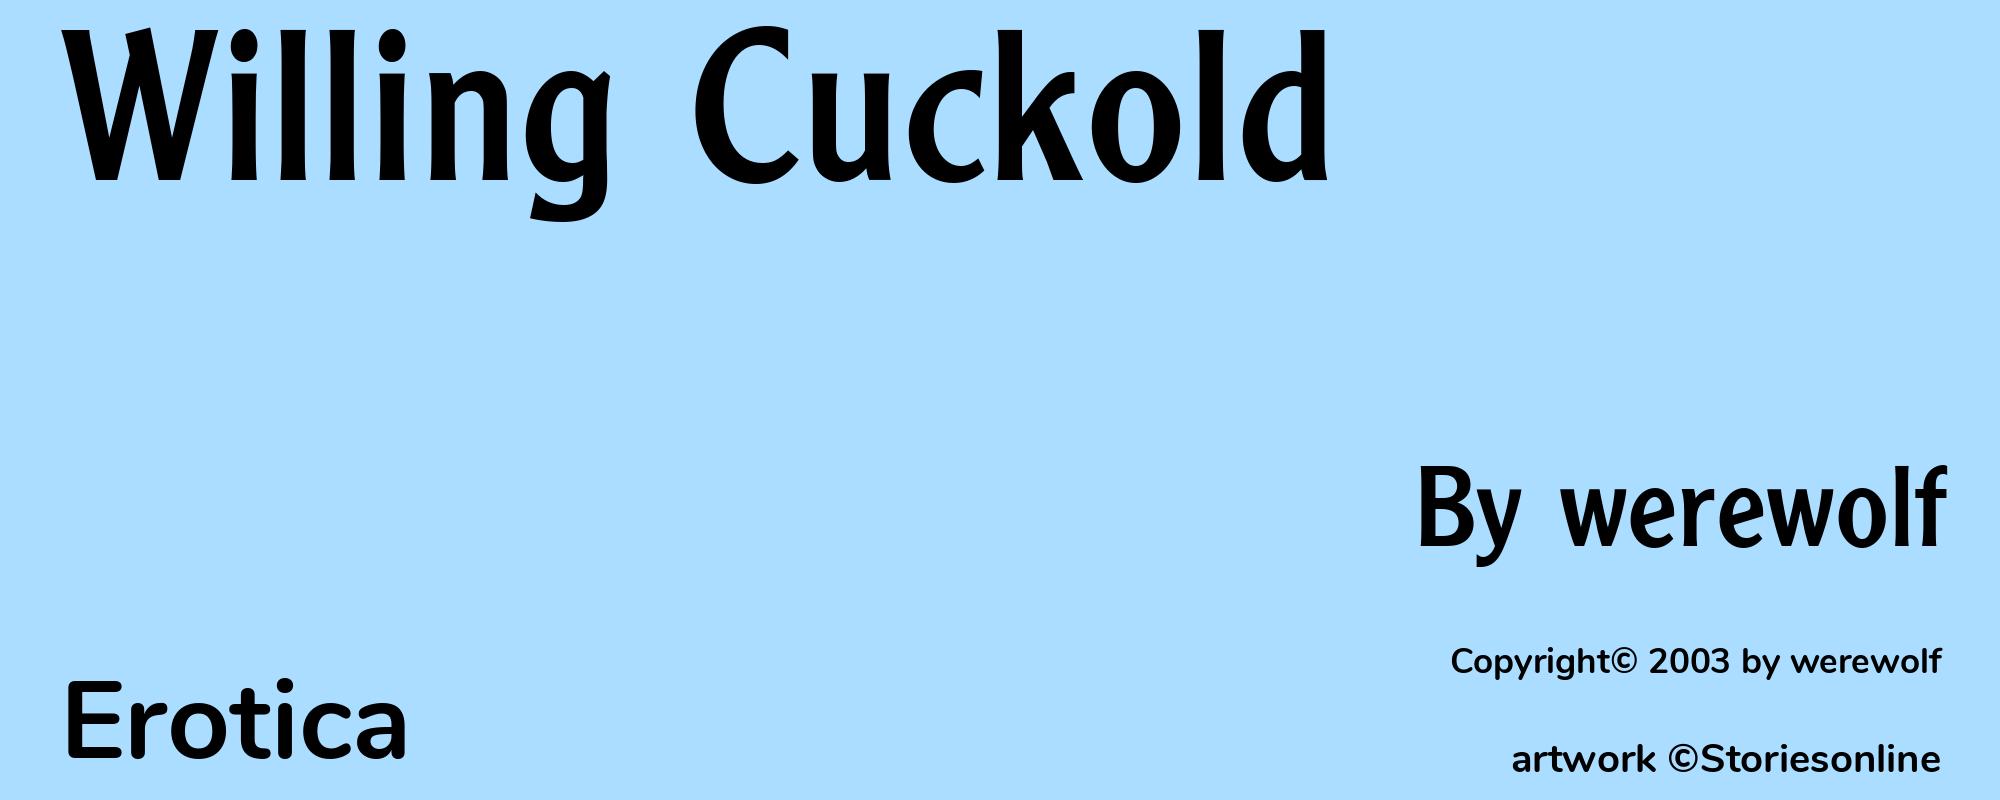 Willing Cuckold - Cover